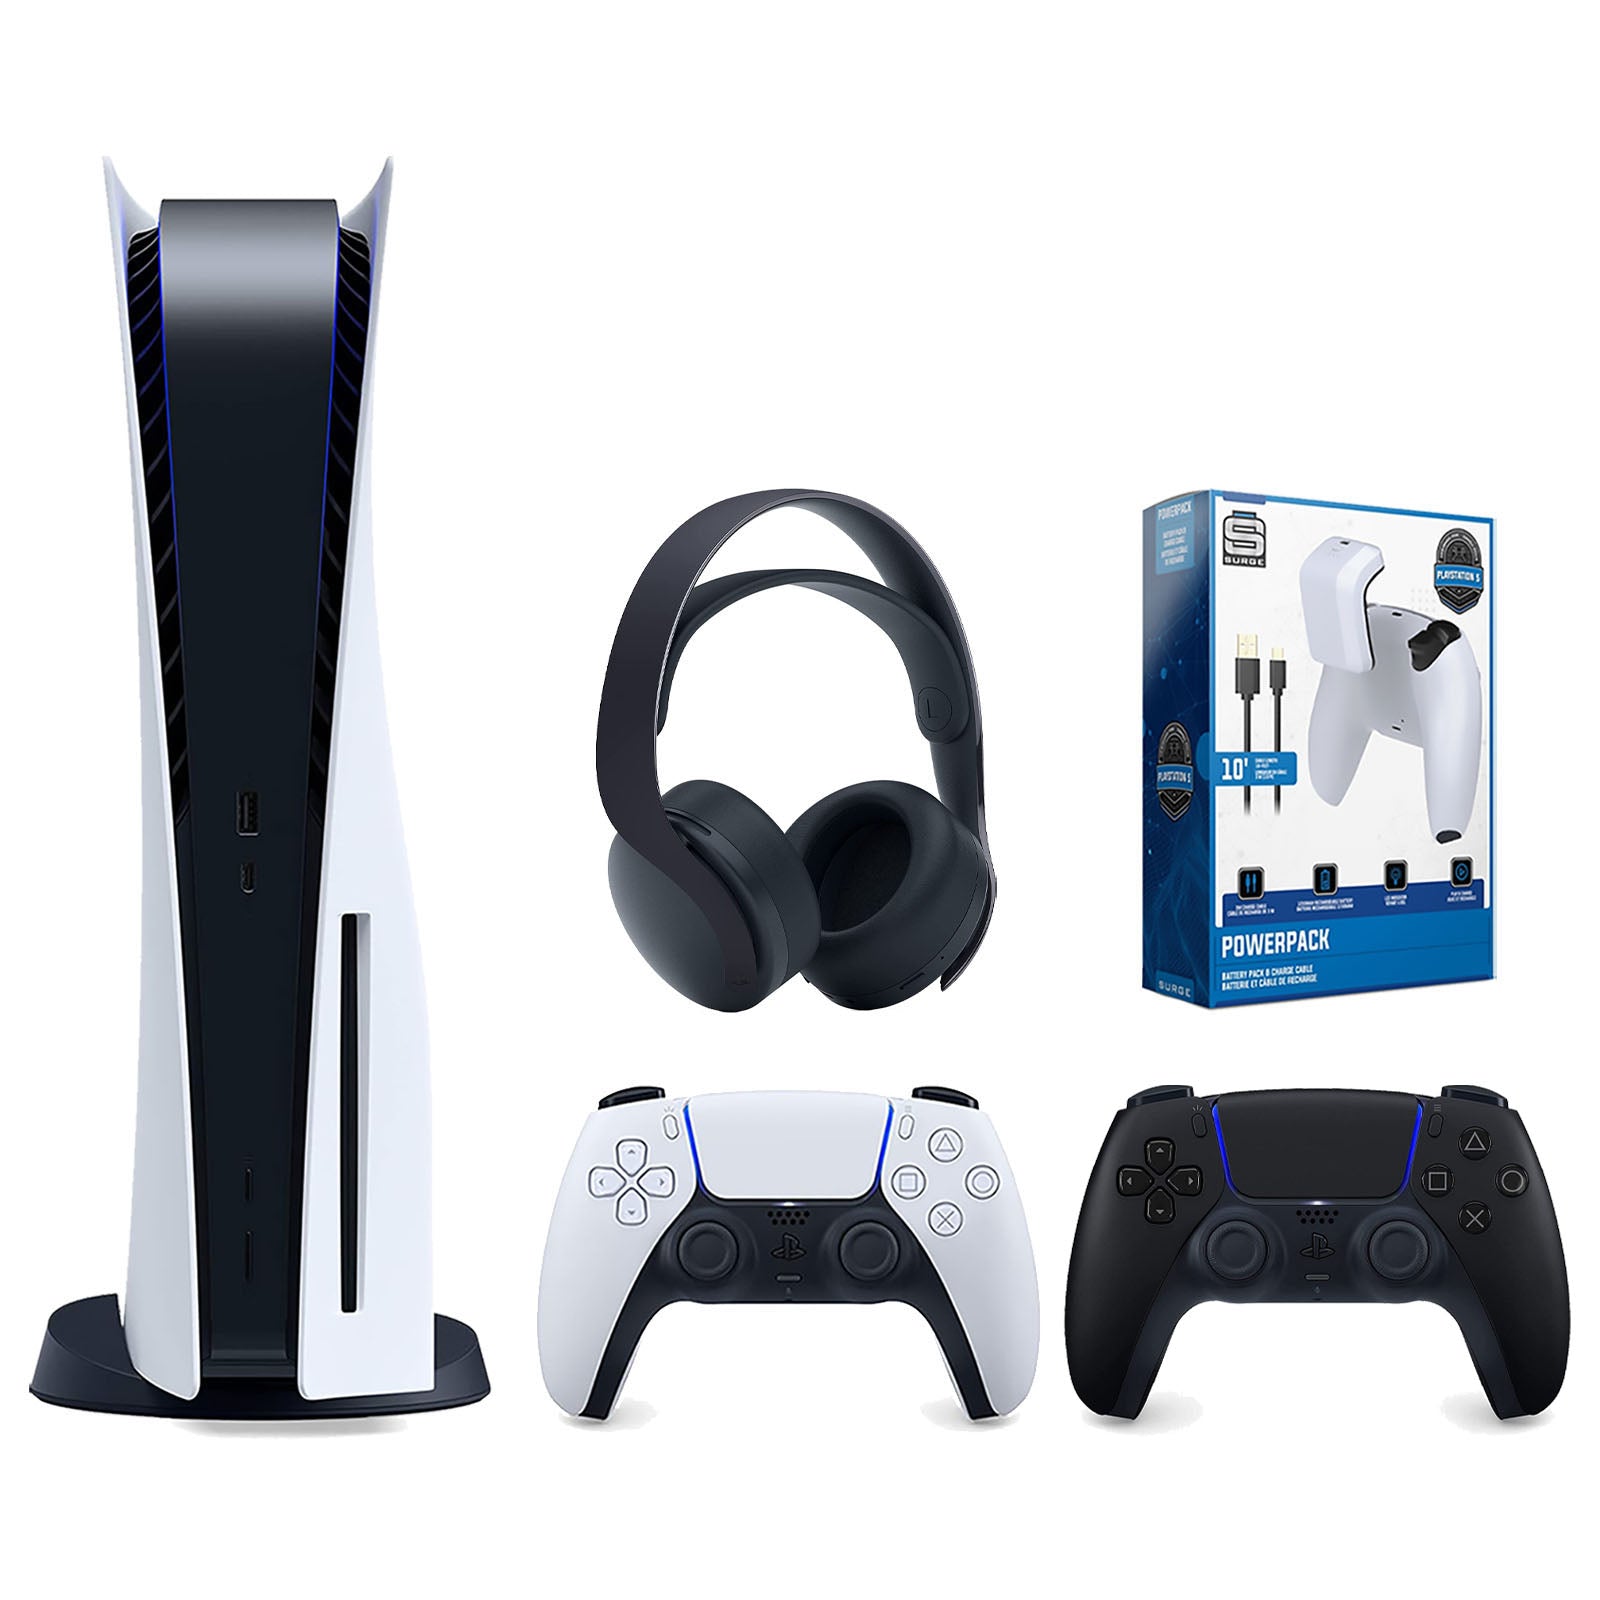 Sony Playstation 5 Disc Version Console with Extra Black Controller, Black PULSE 3D Headset and Surge PowerPack Battery Pack & Charge Cable Bundle - Pro-Distributing